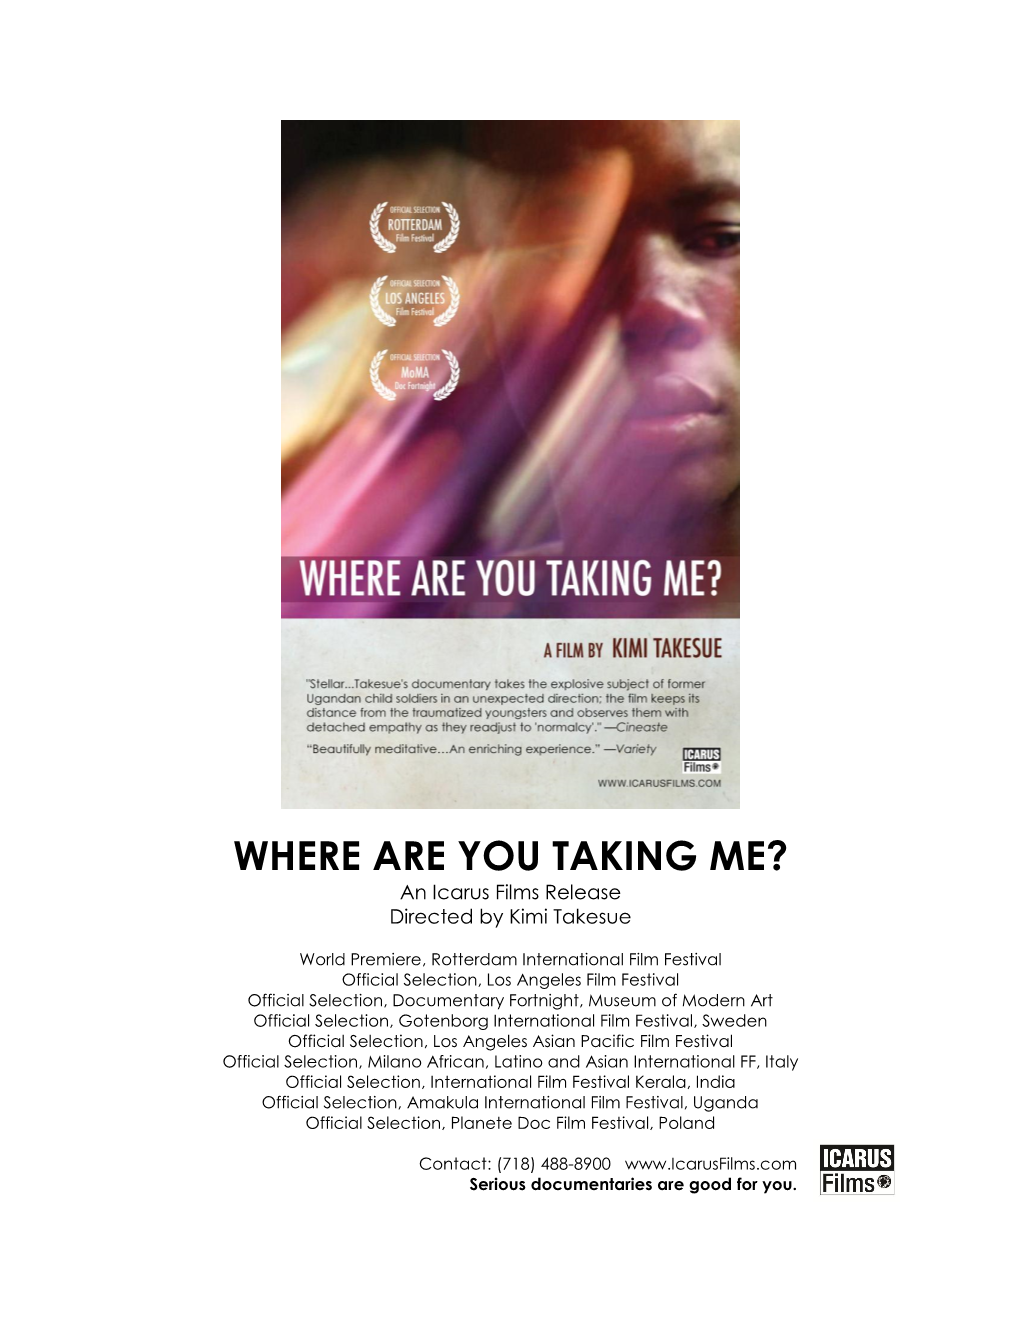 WHERE ARE YOU TAKING ME? an Icarus Films Release Directed by Kimi Takesue